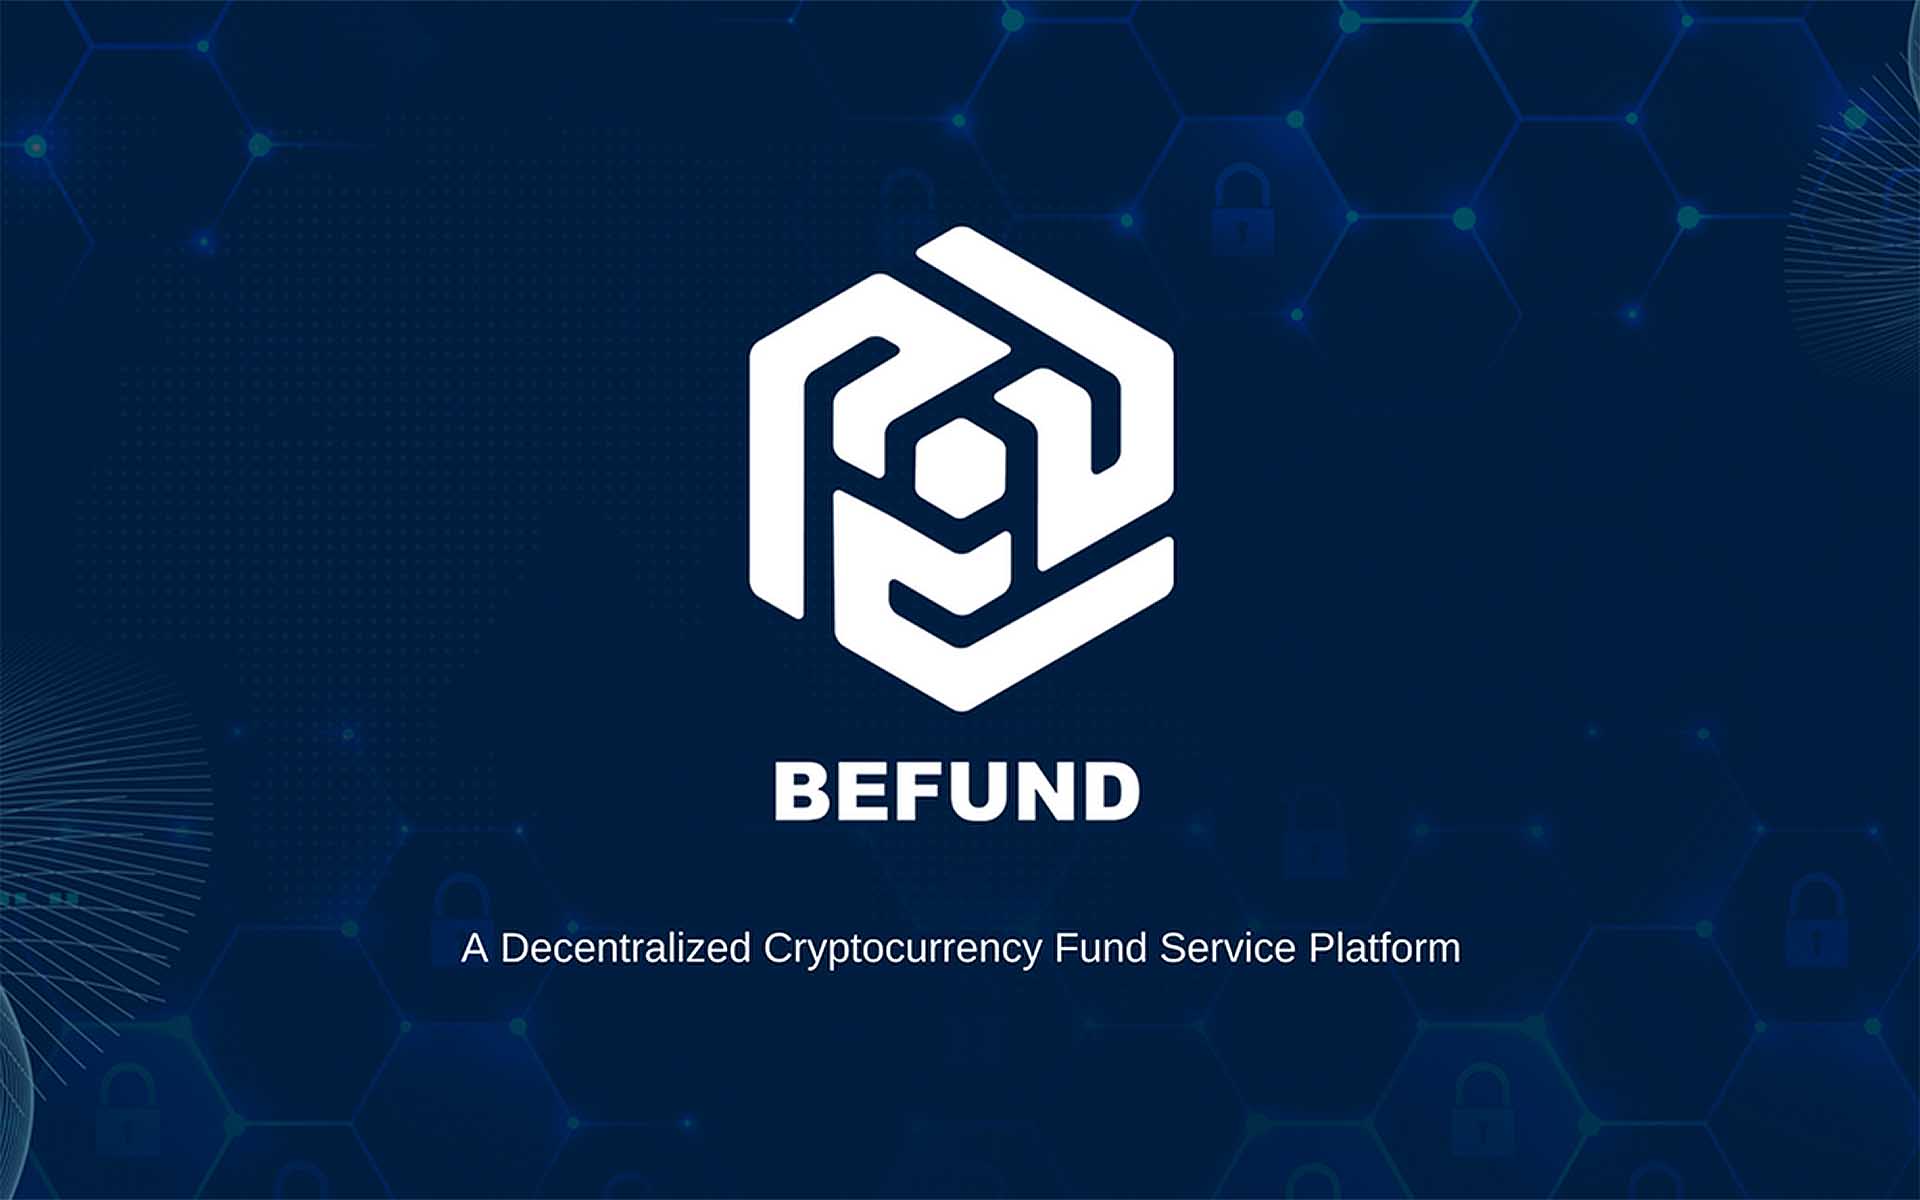 Befund Service Platform Announces Support from Daos Capital as They Prepare to Launch Their Crowdsale